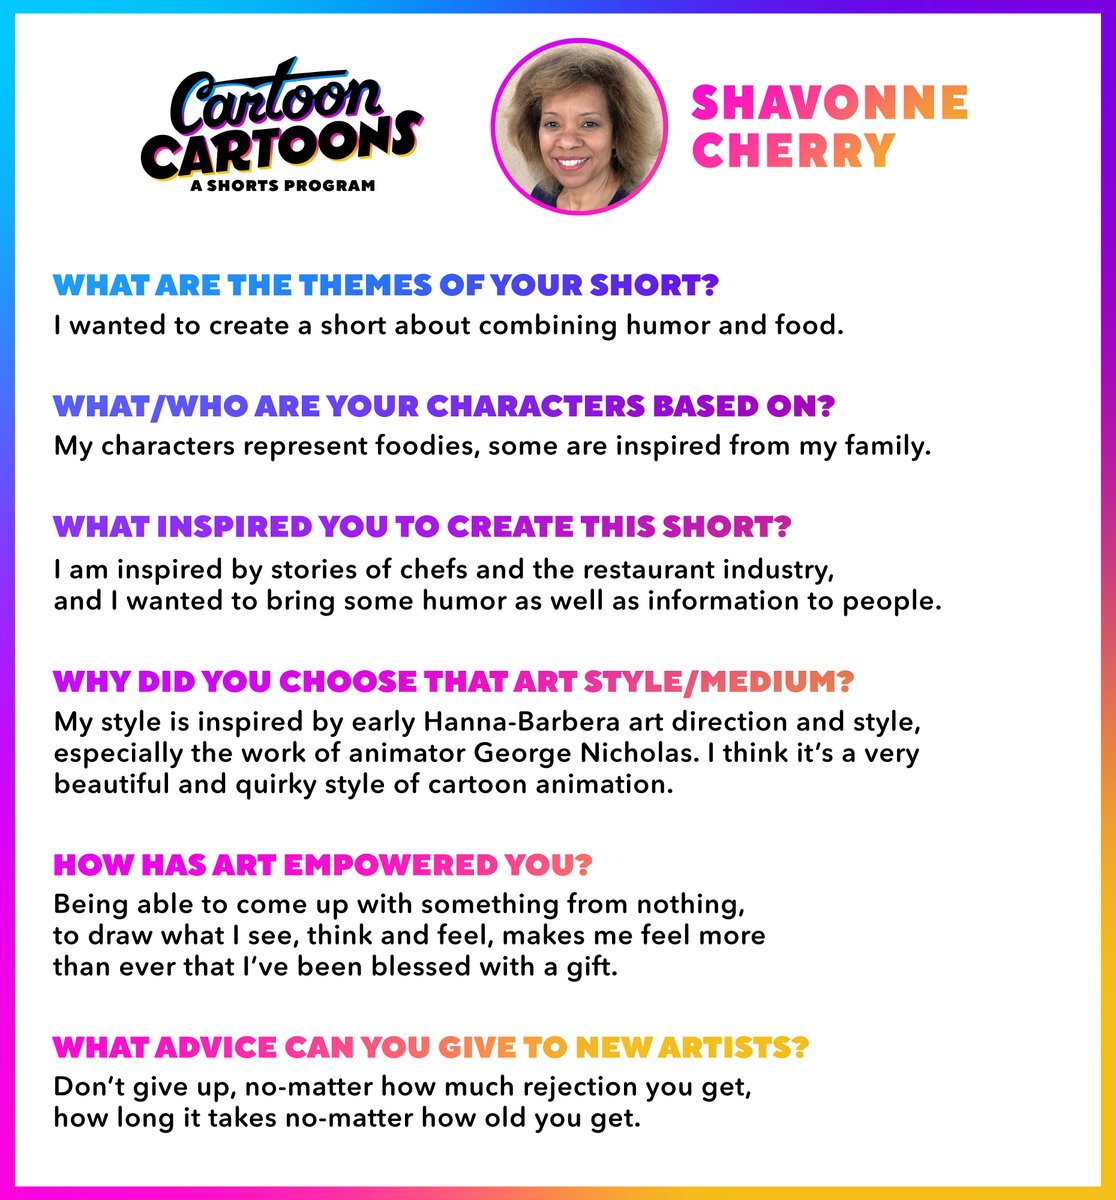 Meet Cartoon Cartoons artist @Shavonne_Cherry! Her short, Off the Menu, centers around four animals who have humor-filled conversations about the world of food! 🐮🐔🐷🐟 Stay tuned for more artist features from Cartoon Cartoons! #CartoonNetwork #Artists #AnimatedShorts